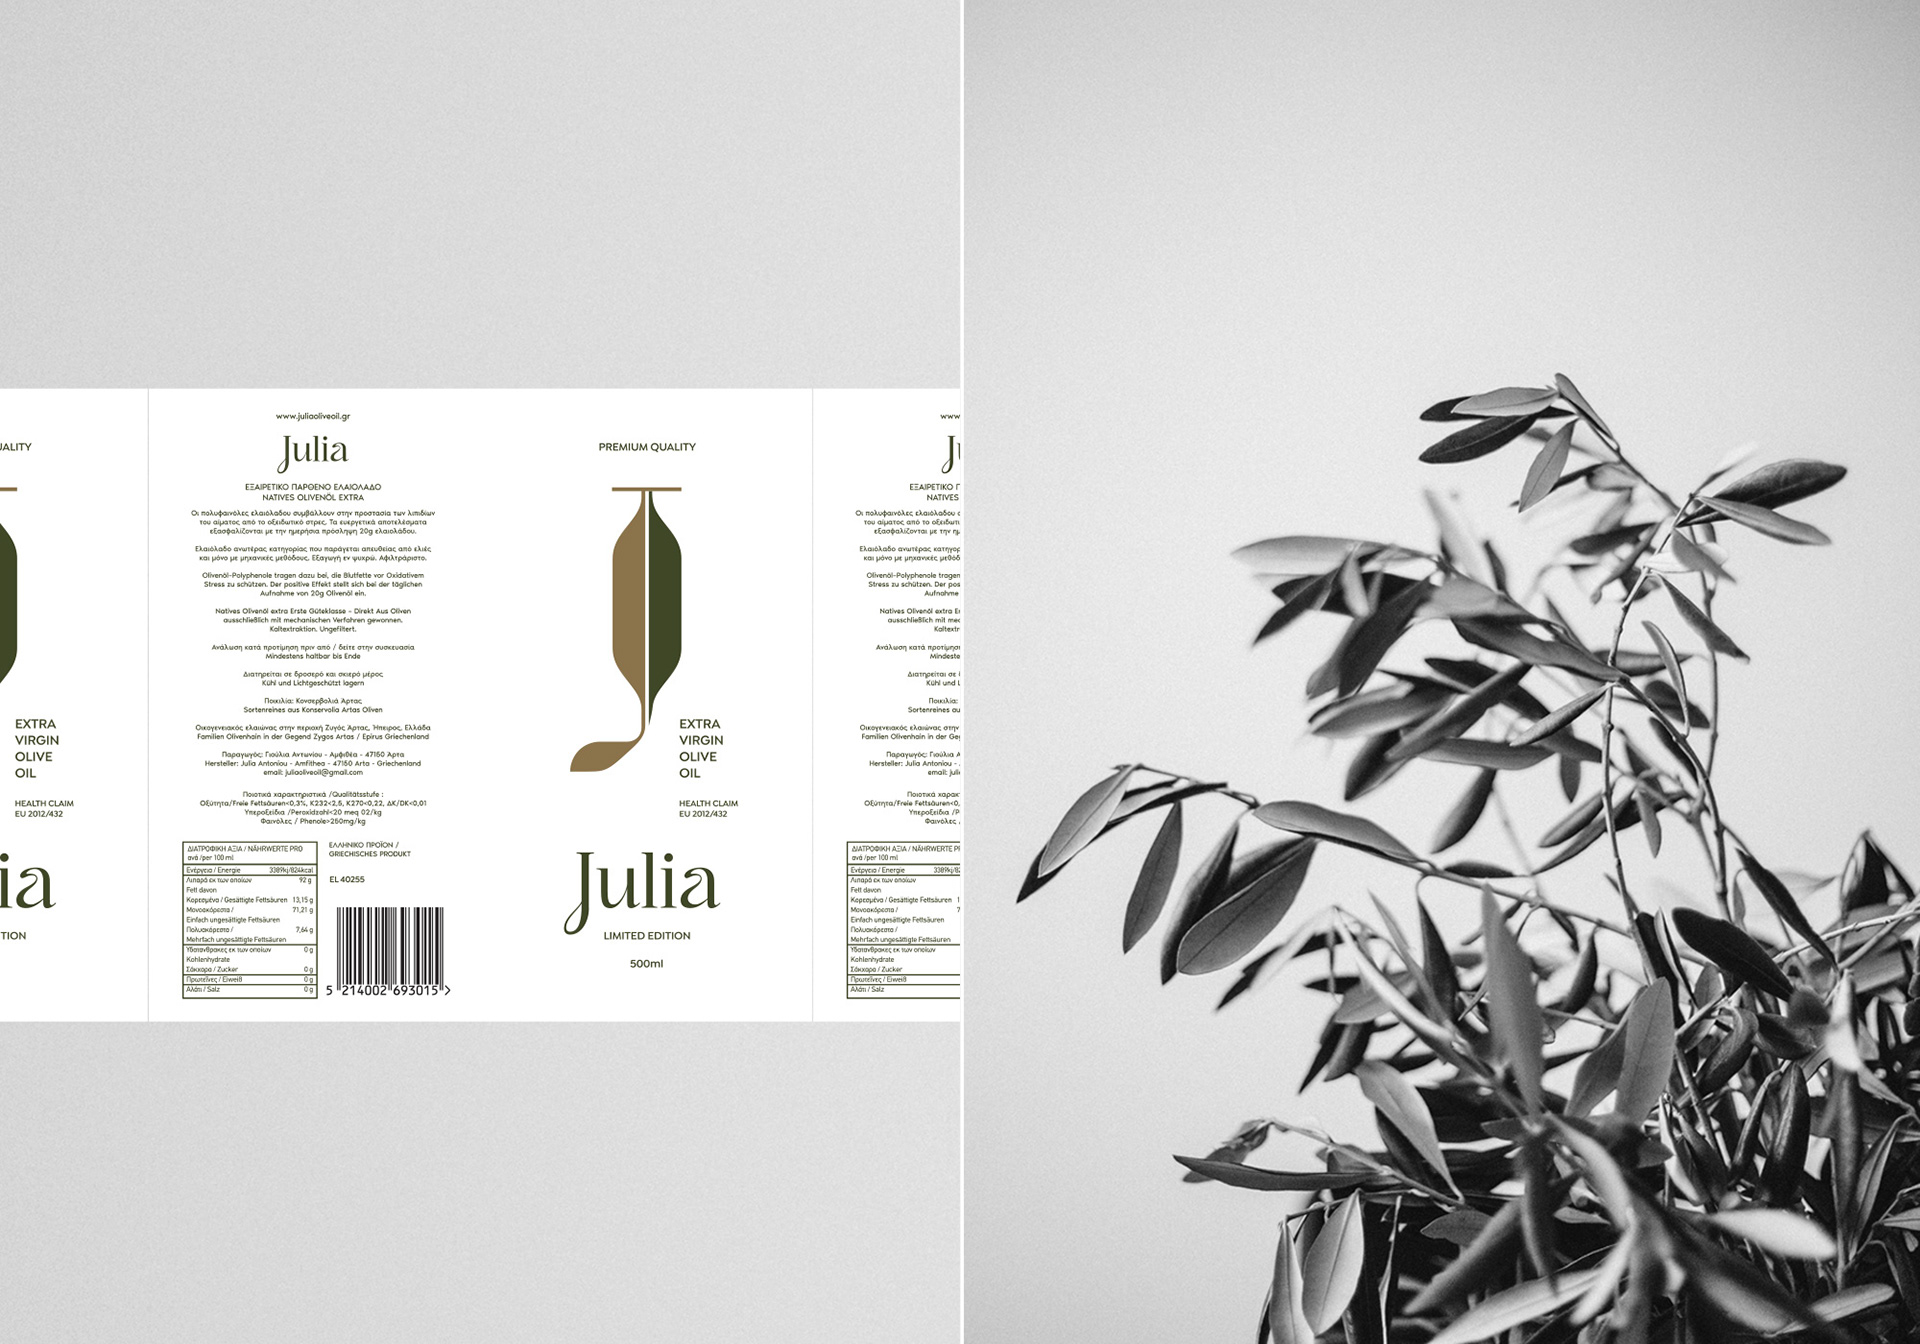 olive oil packaging